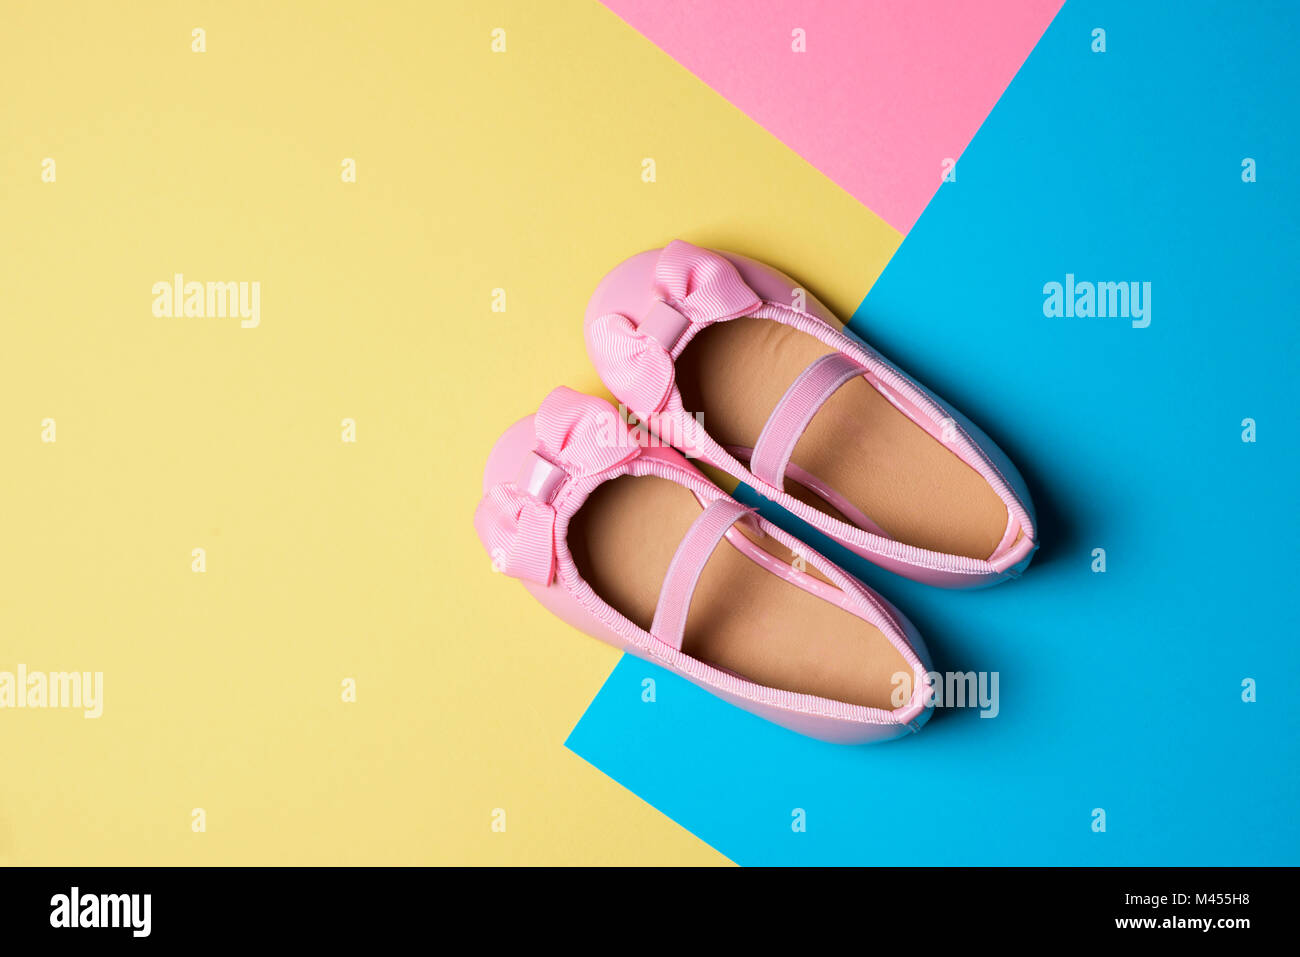 high angle view of a pair of pink patent leather shoes on a yellow, blue and pink background, with some blank space Stock Photo